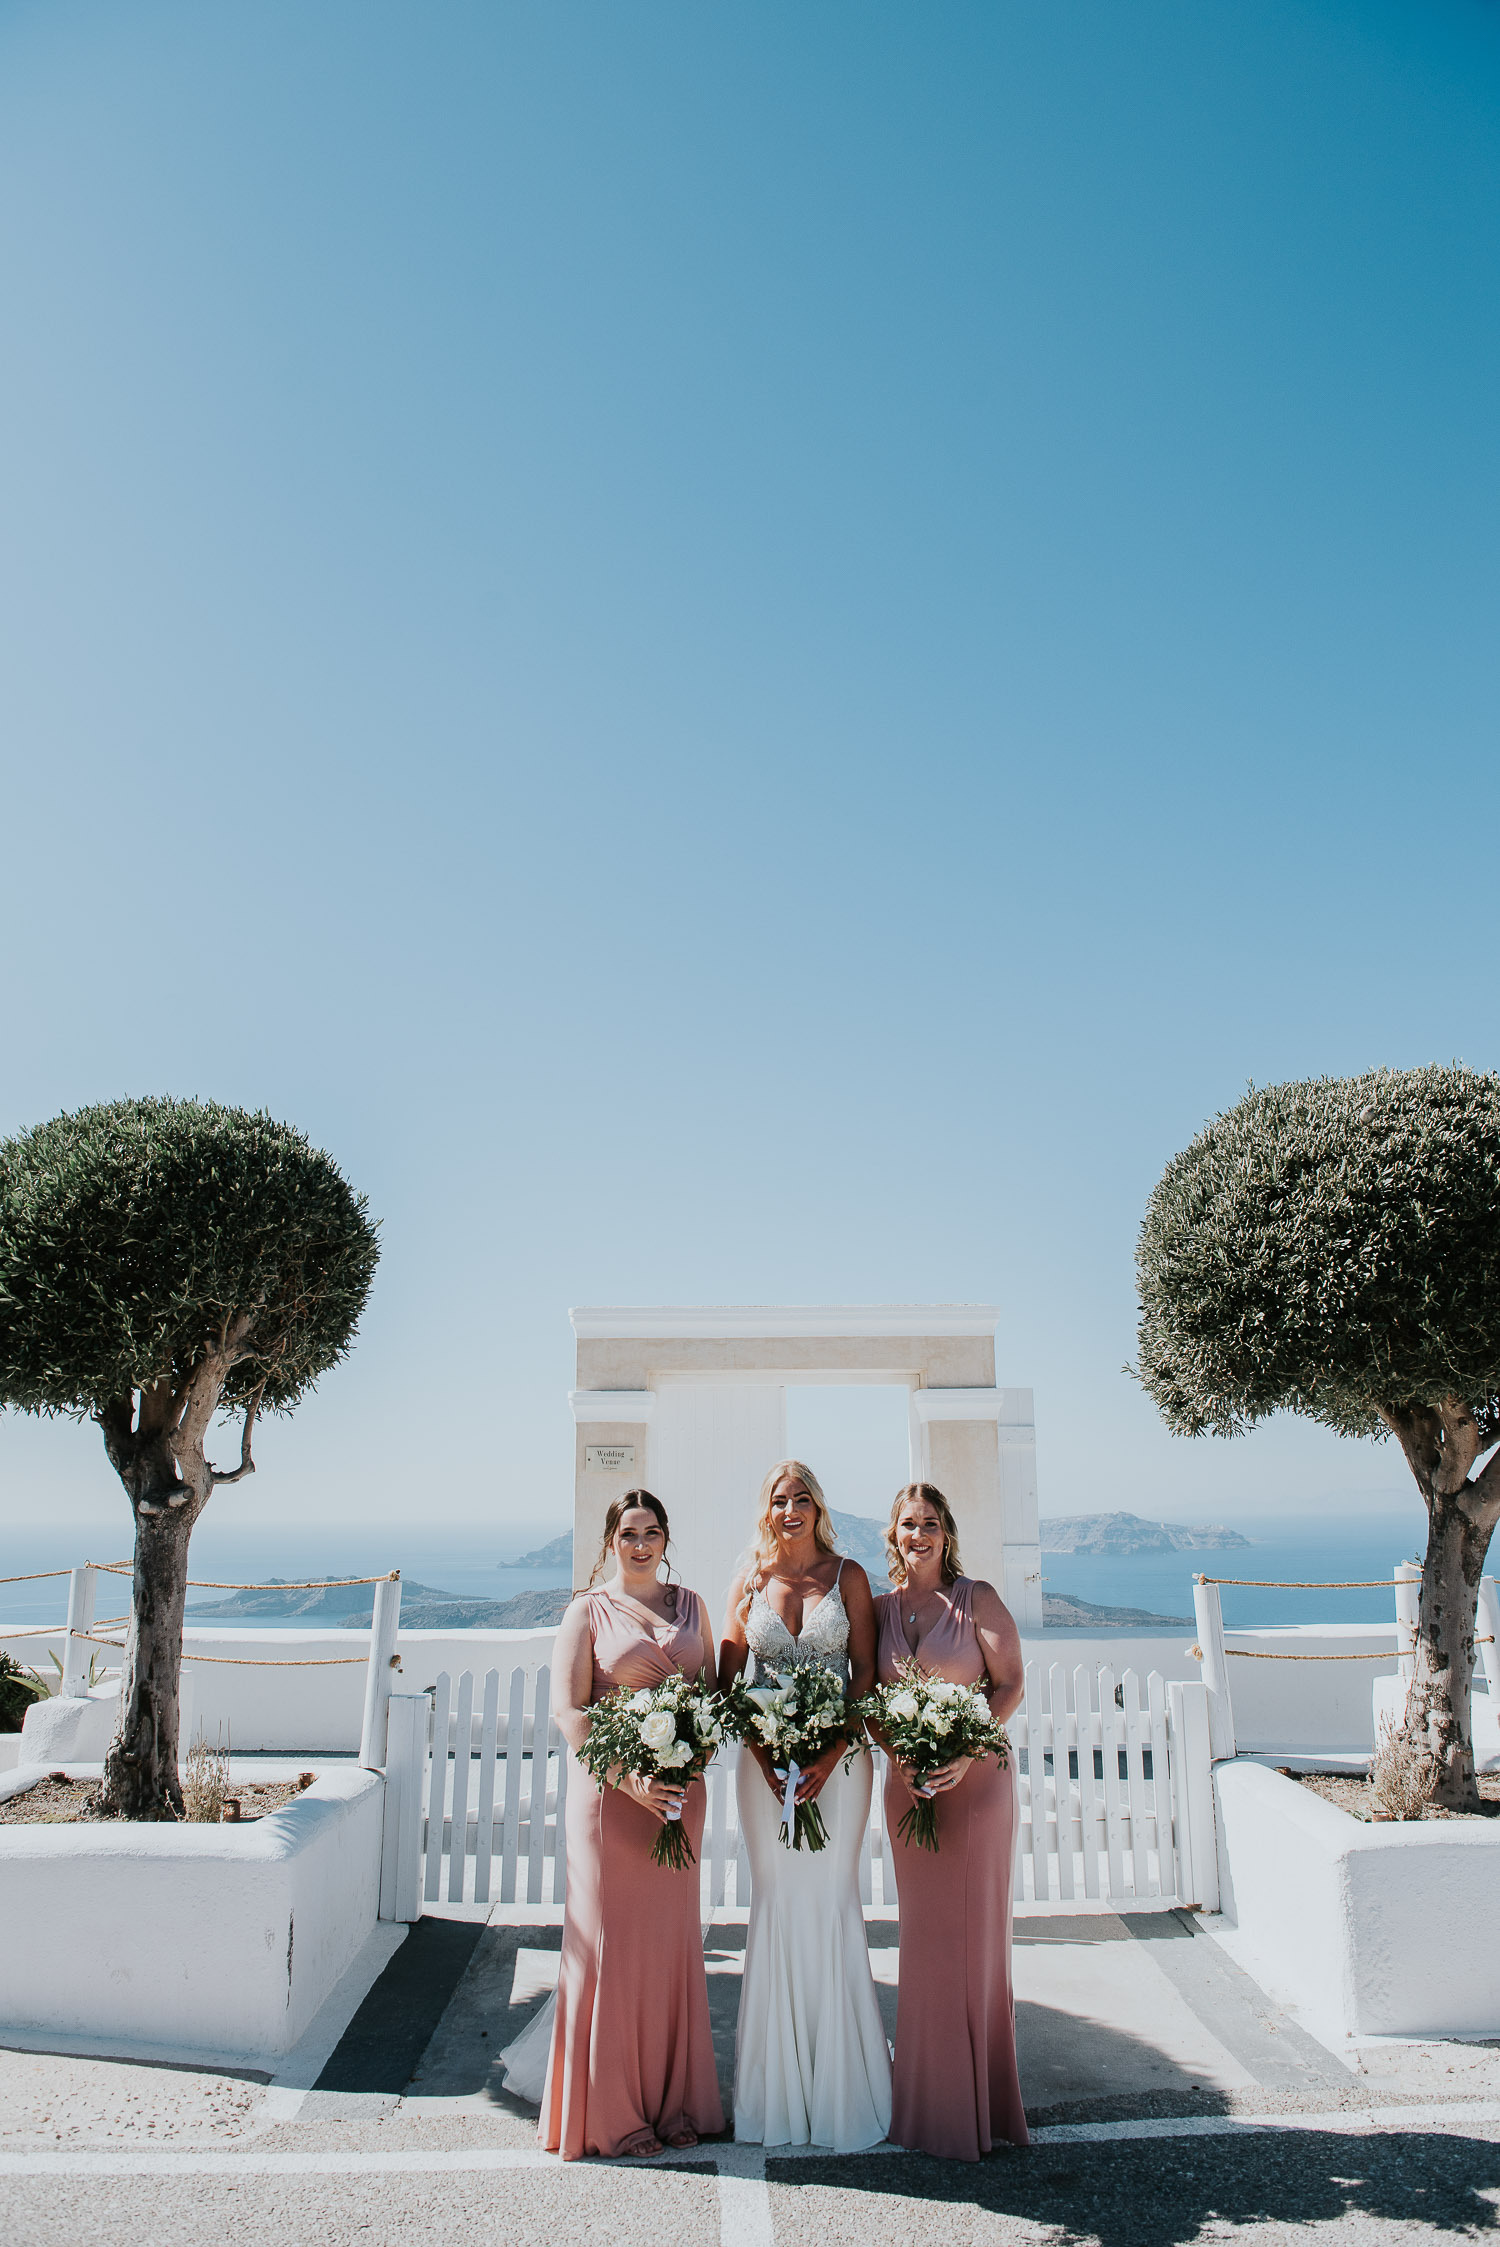 Wedding photographer Santorini: bride and her bridesmaids in front of the gate with trees around by Ben and Vesna.